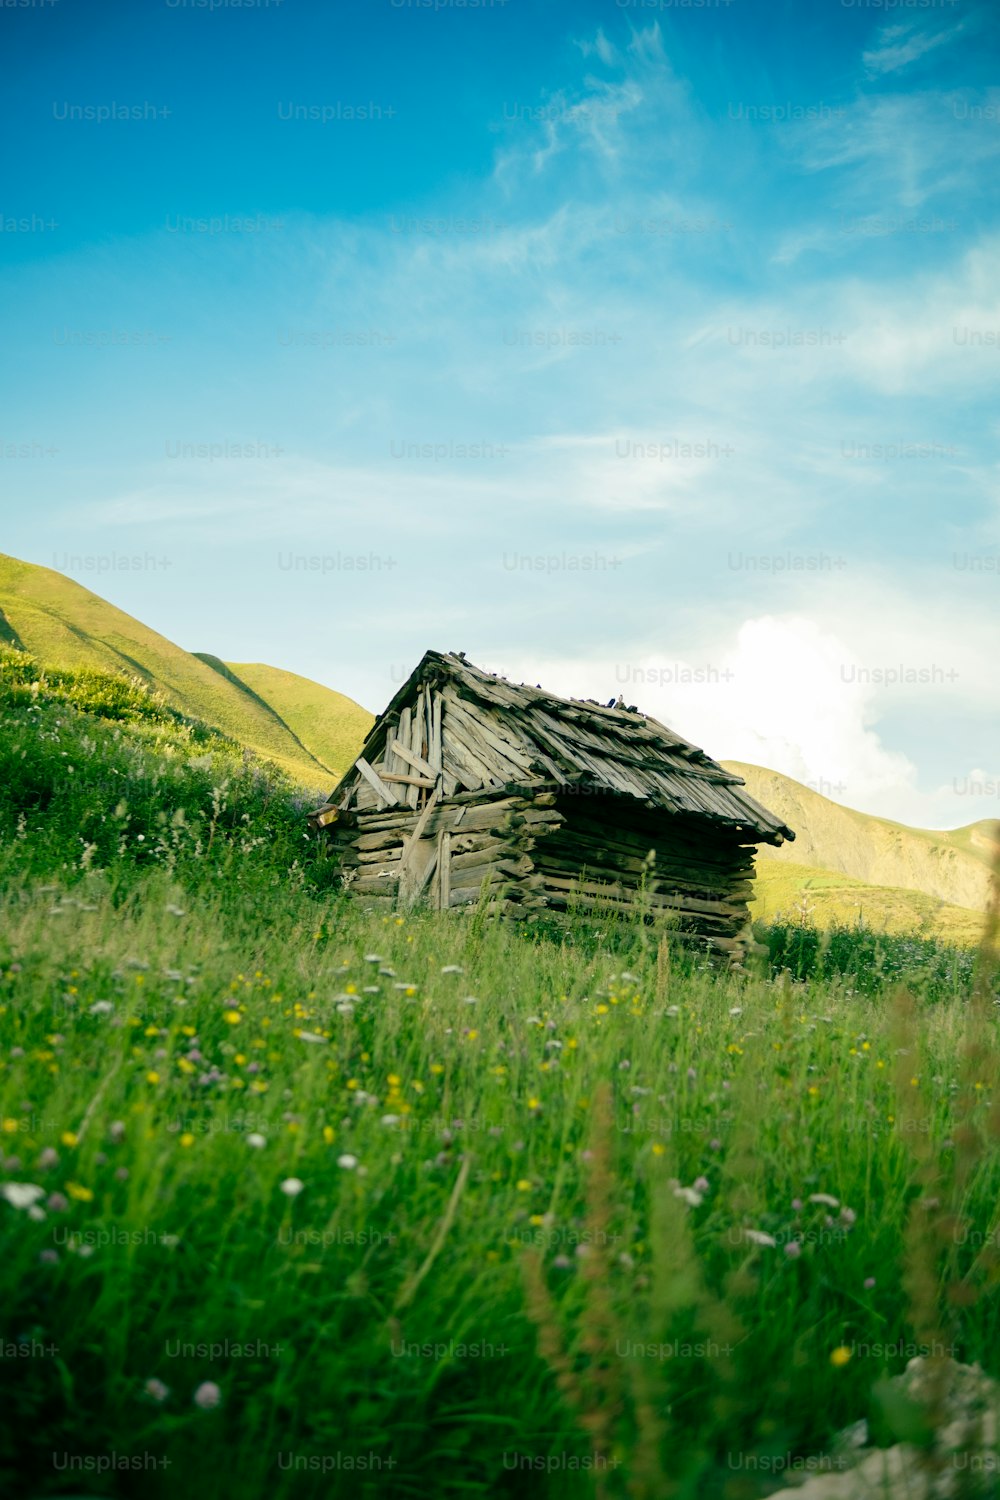 a small wooden cabin in a grassy field